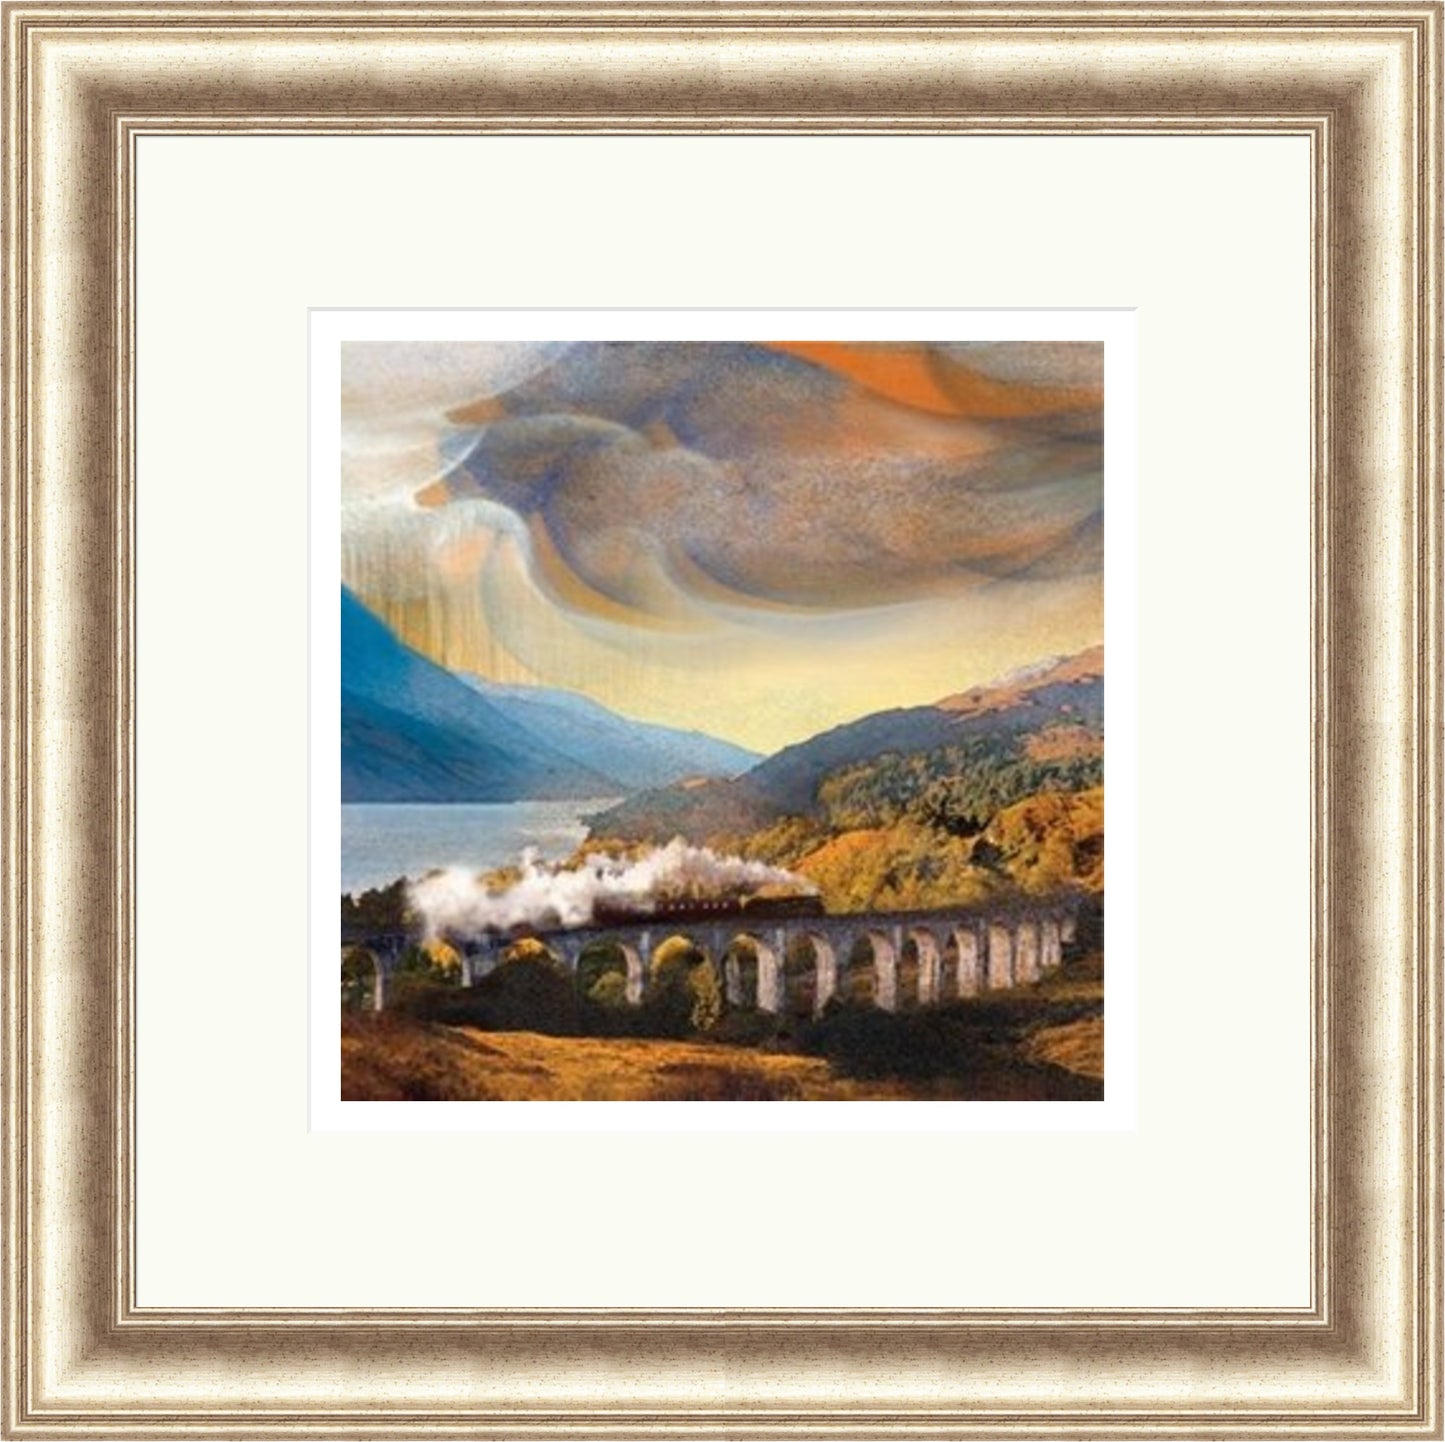 Glenfinnan Viaduct by Esther Cohen